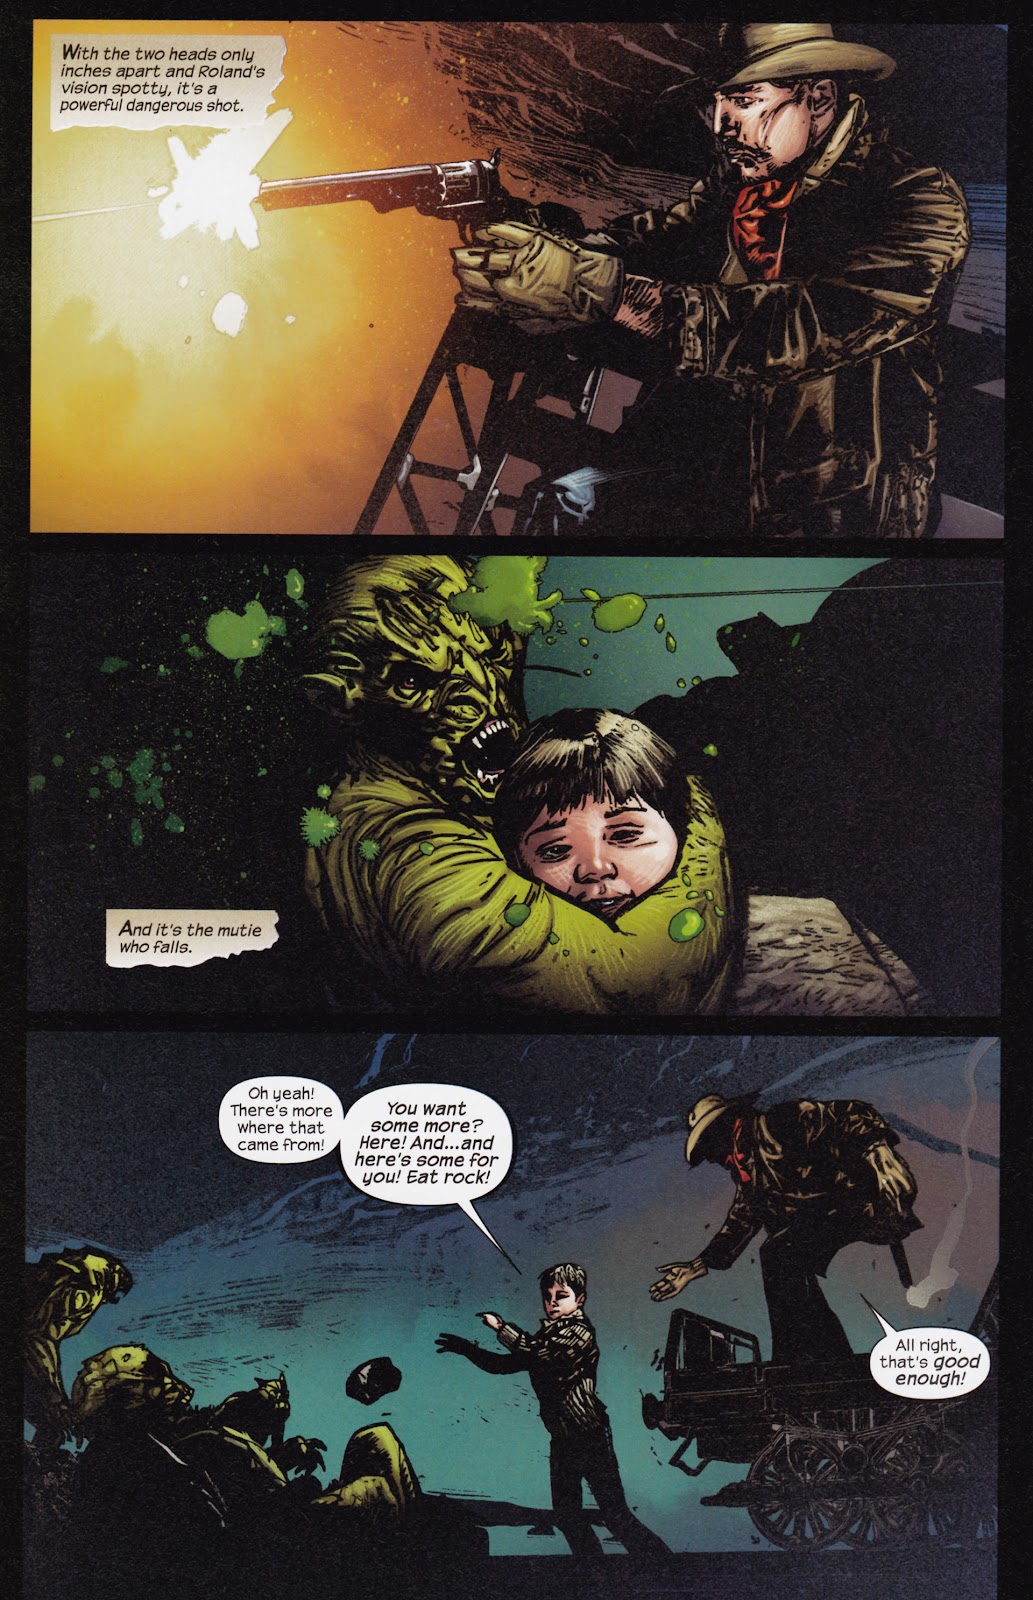 Dark Tower: The Gunslinger - The Man in Black issue 3 - Page 11